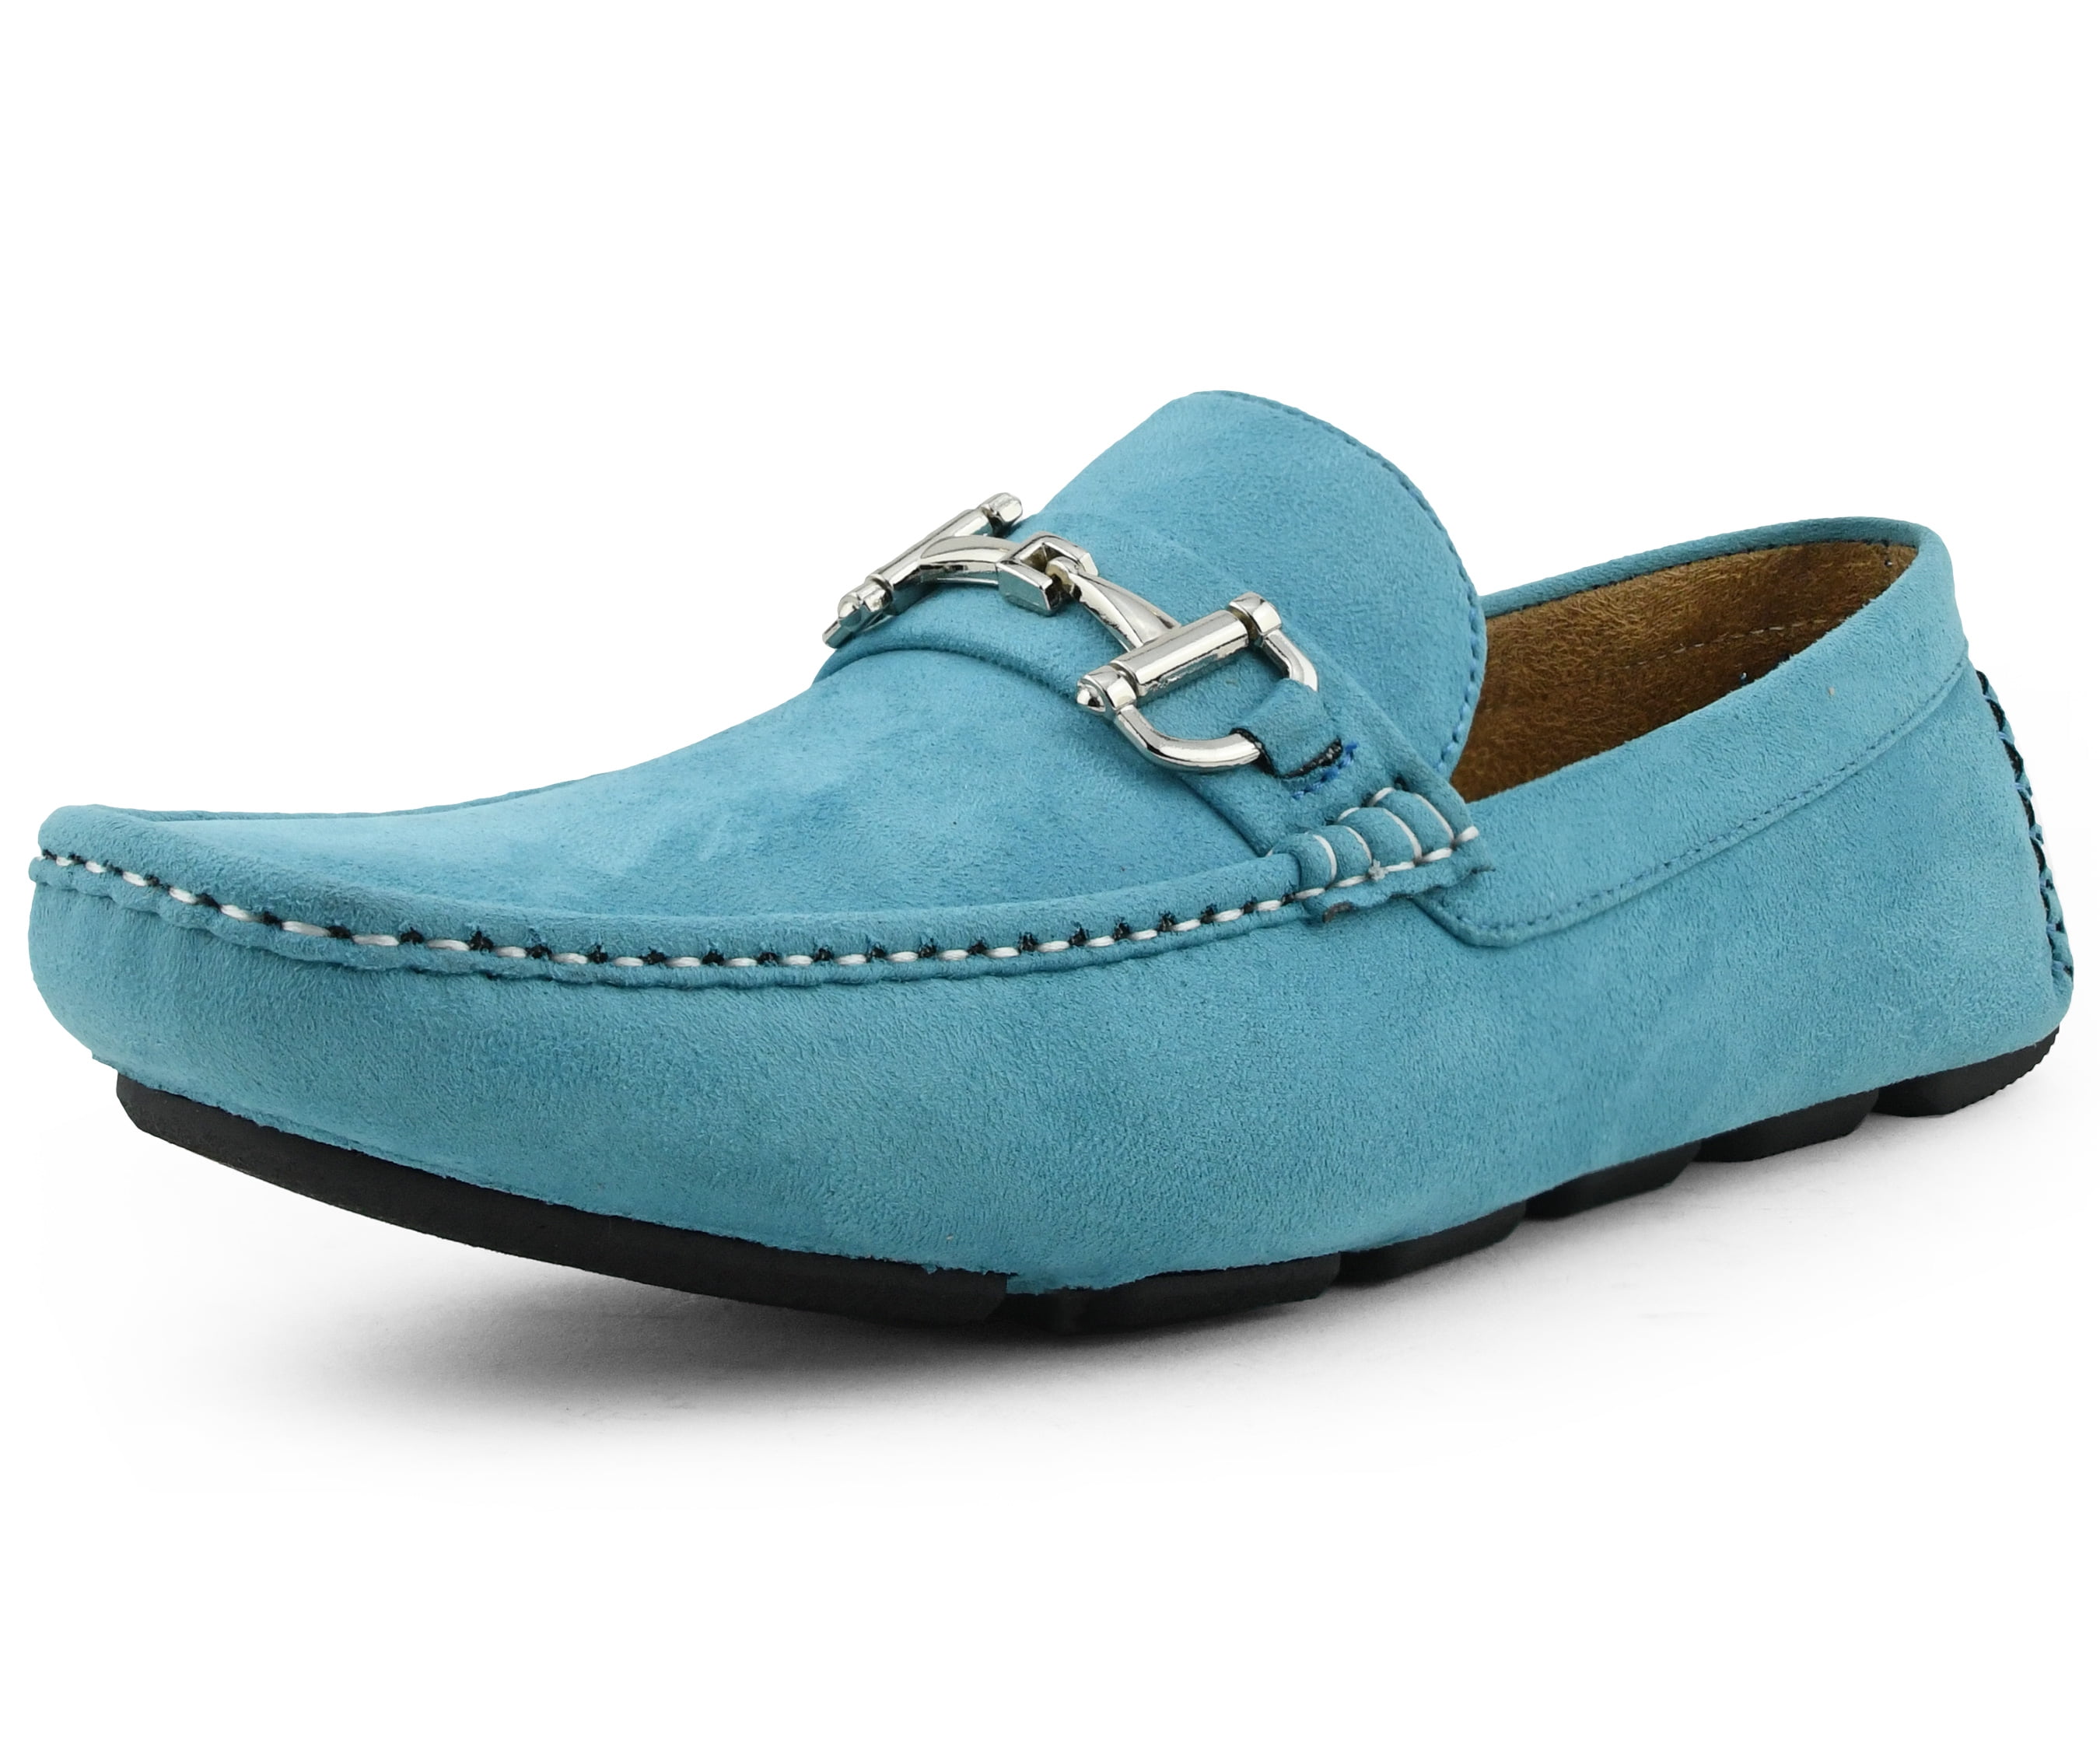 AC Casual Mens 6630 Slip On Loafer Driving Moccasin Shoes Blue Size 9 10 10.5 12 